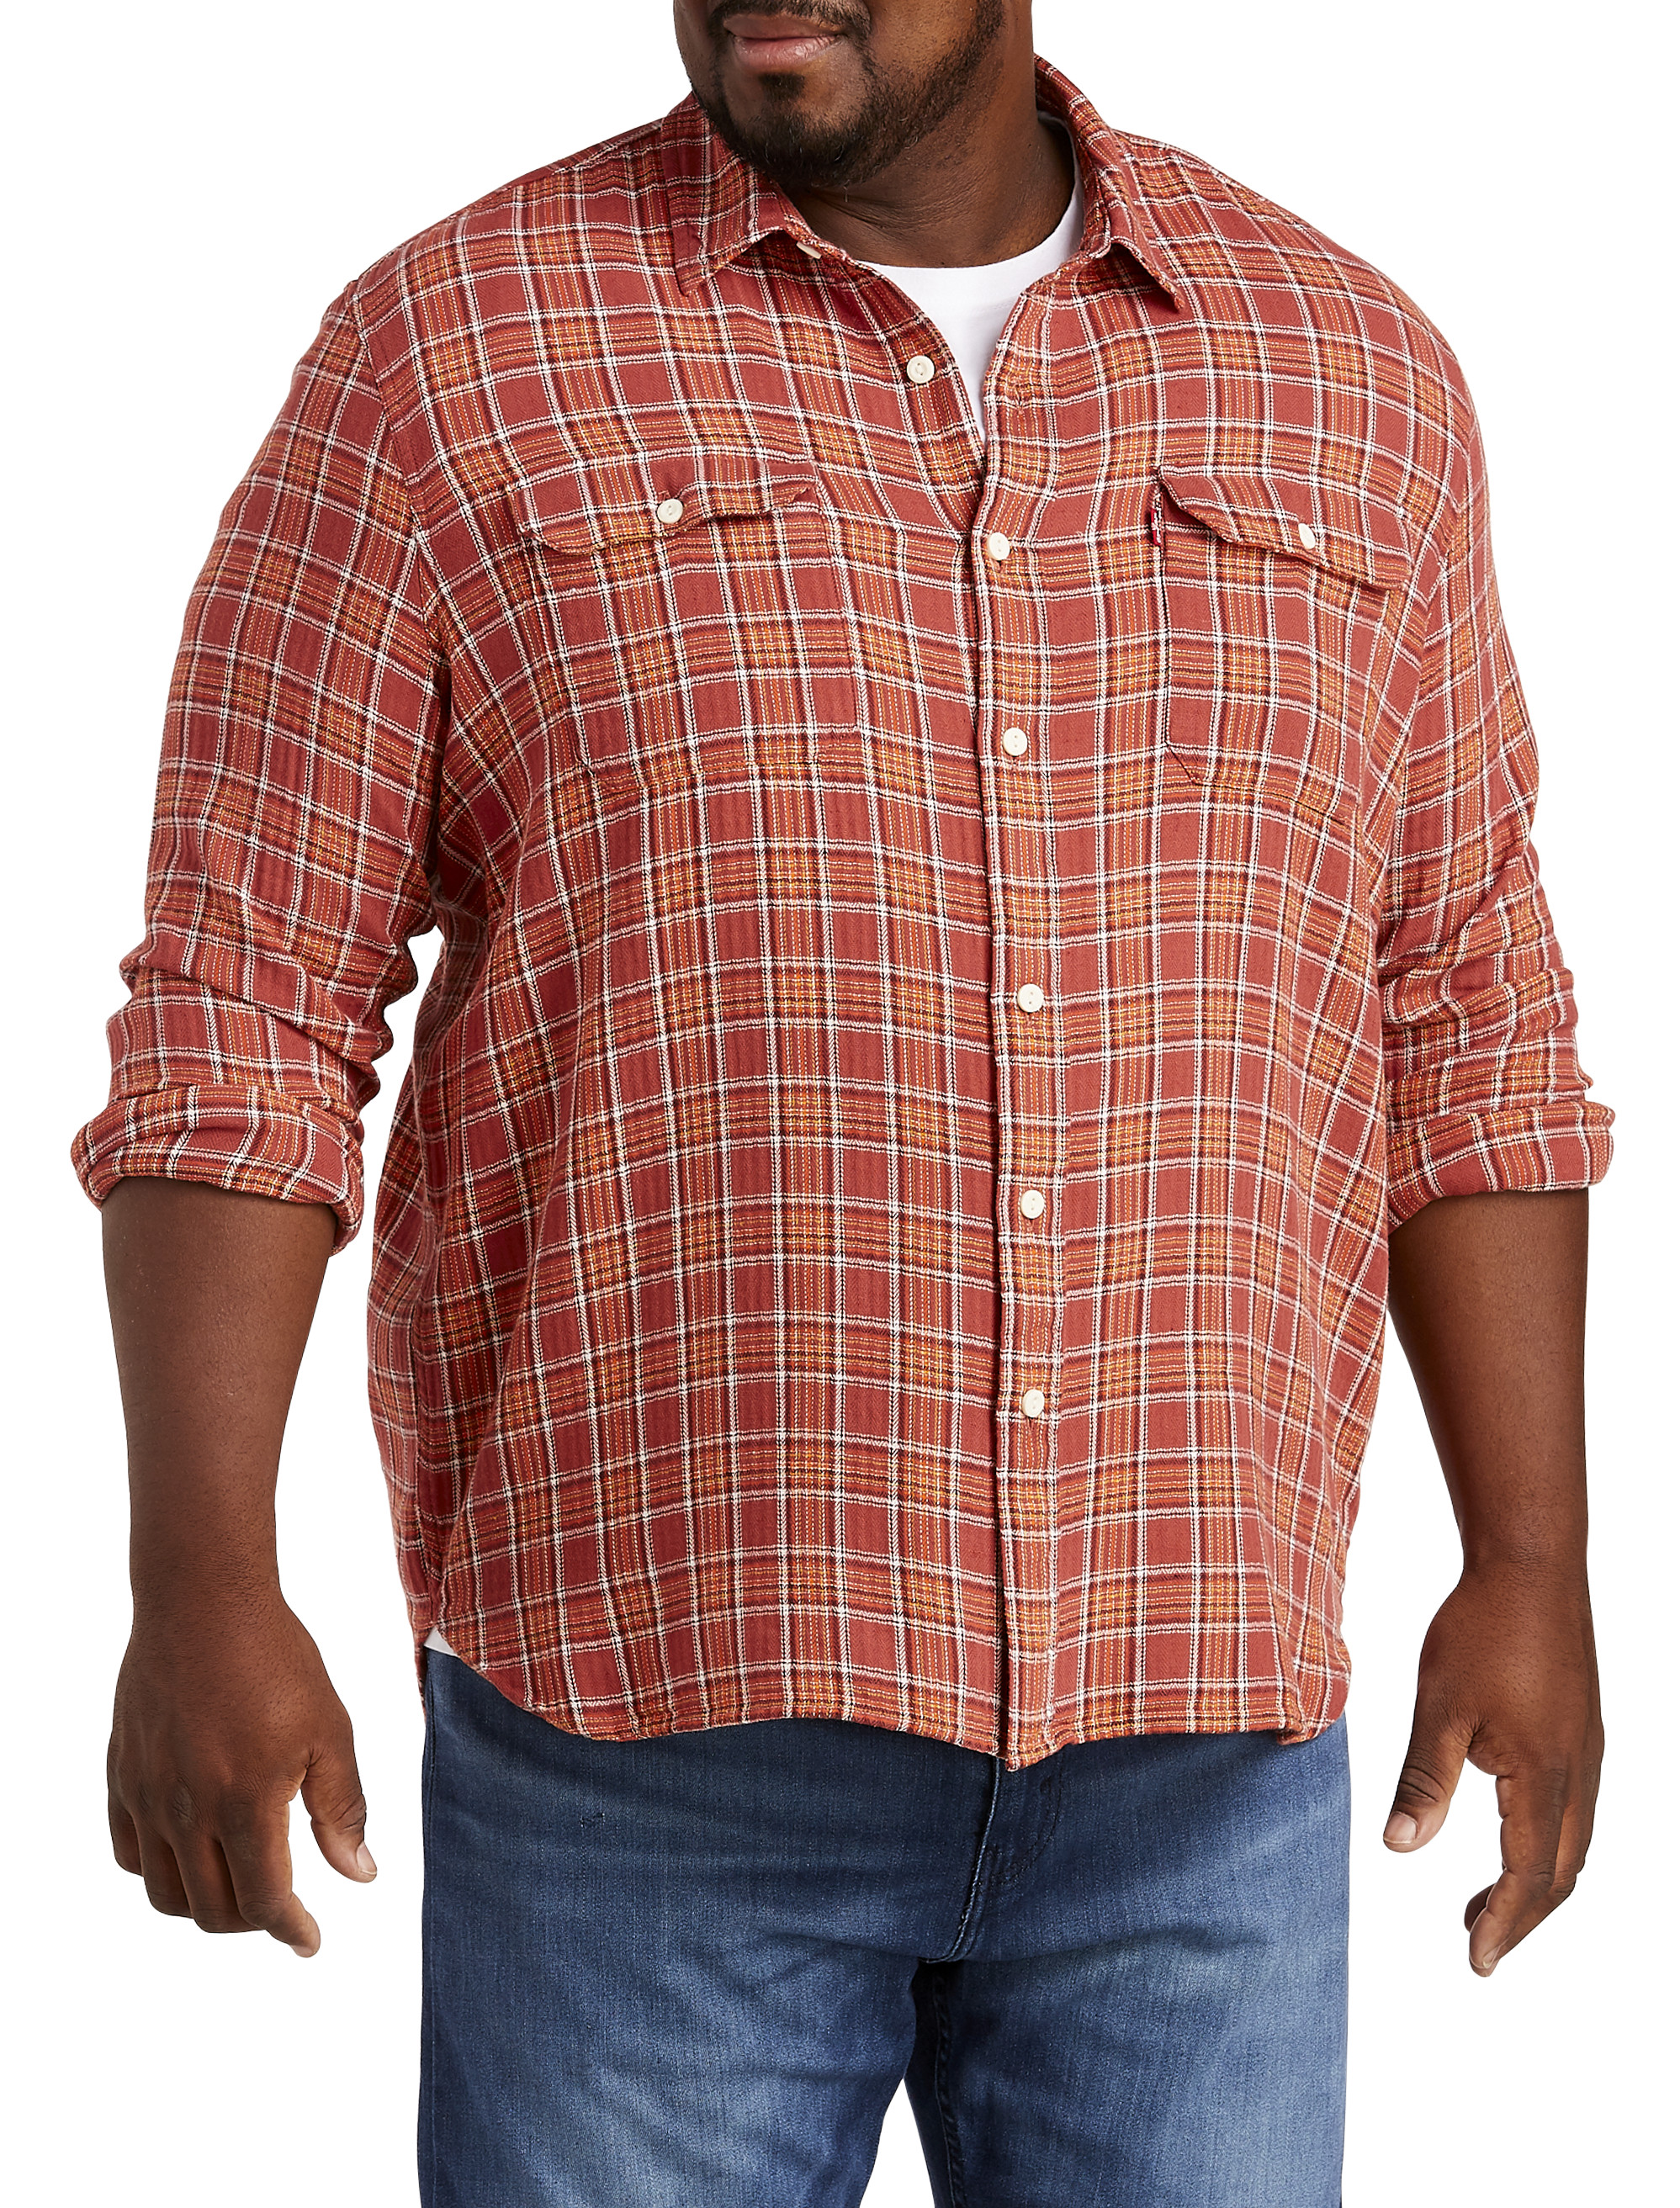 Big and Tall | Levi's Classic Worker Shirt | DXL Men's Clothing Store